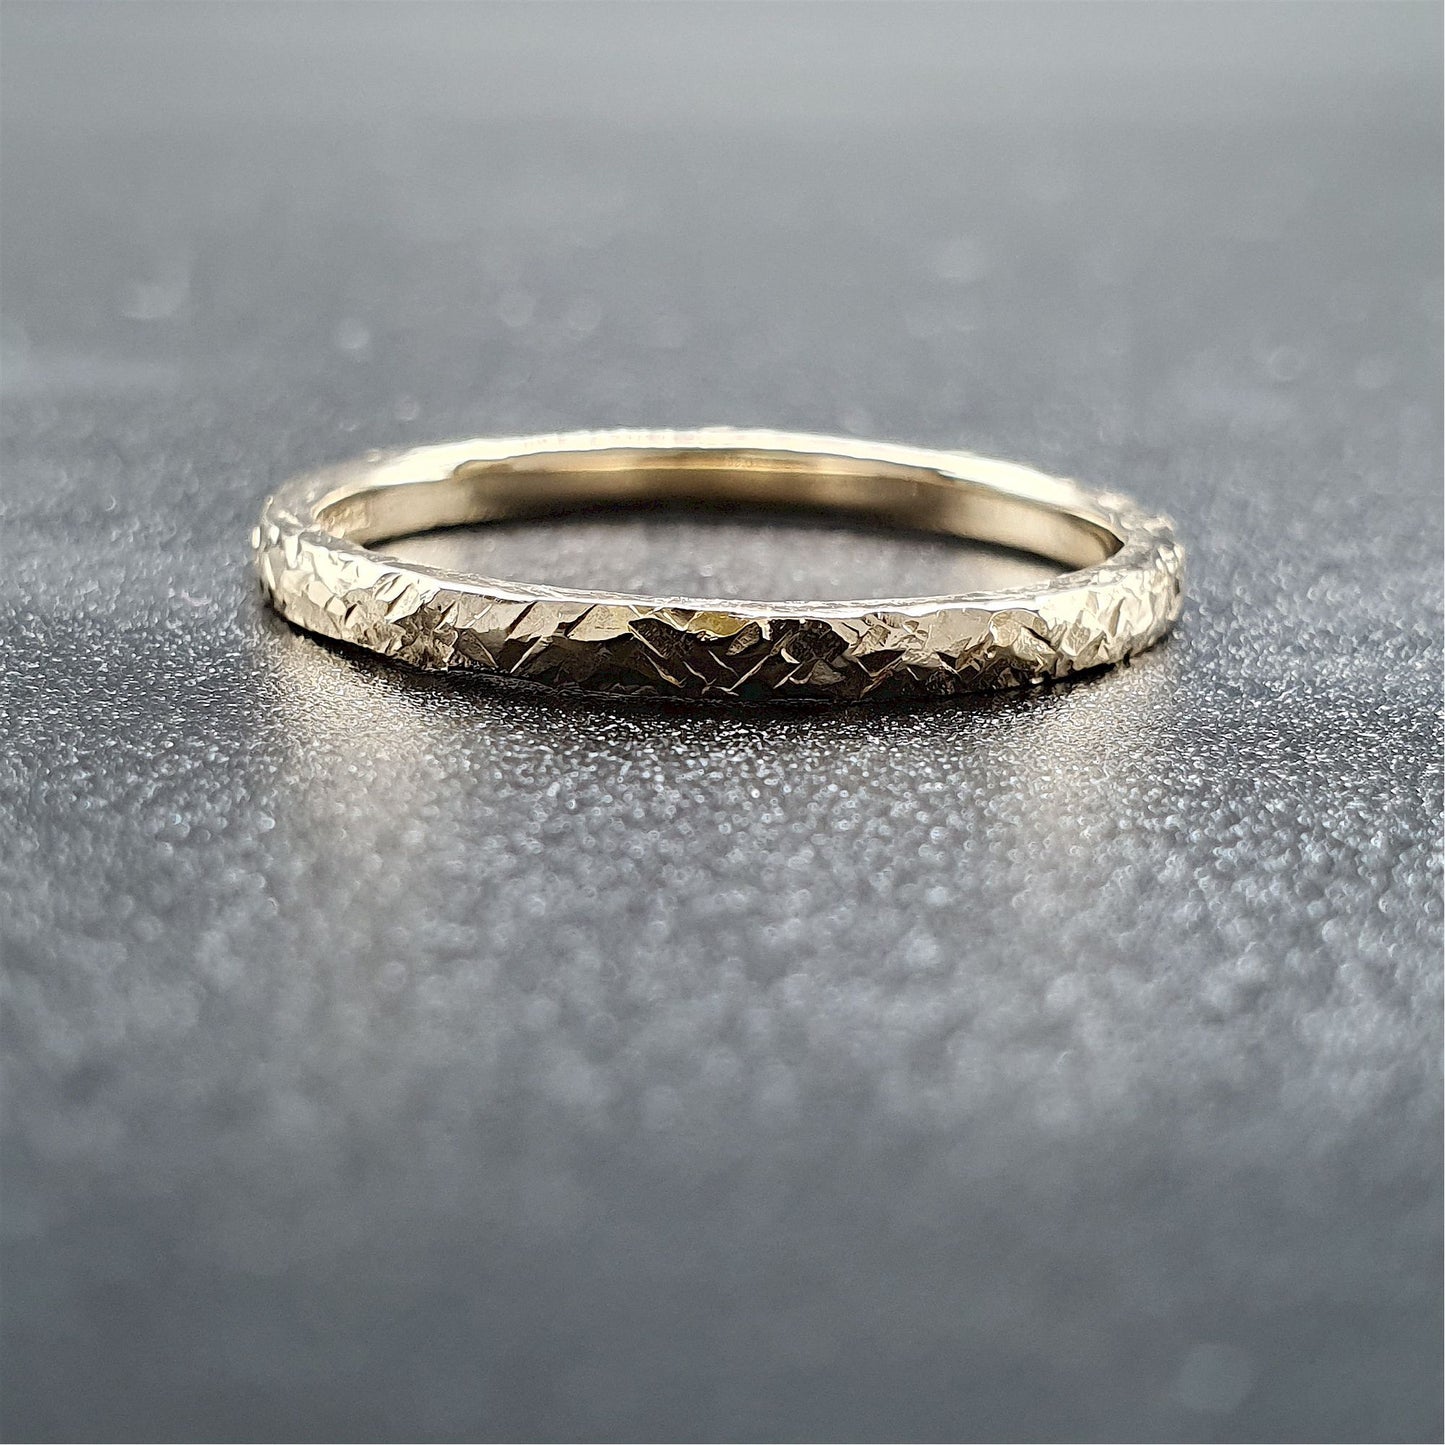 Wedding ring, thin yellow gold Fire hammered design - Cumbrian Designs